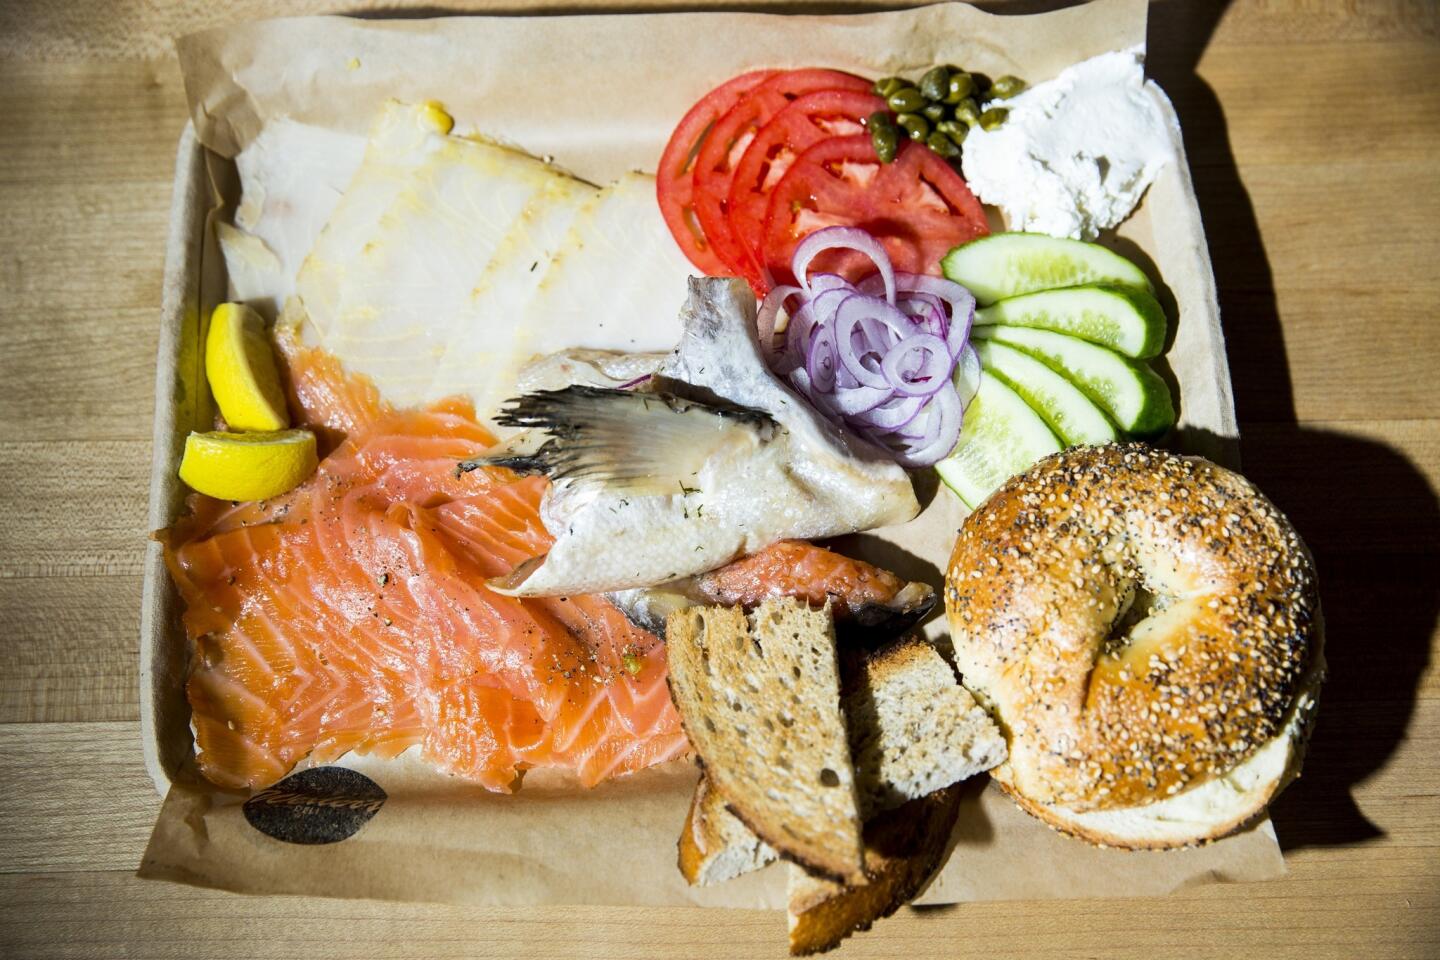 The smoked fish plate, with lox, sturgeon salmon collar, everything bagel and toasted rye bread, for $22.